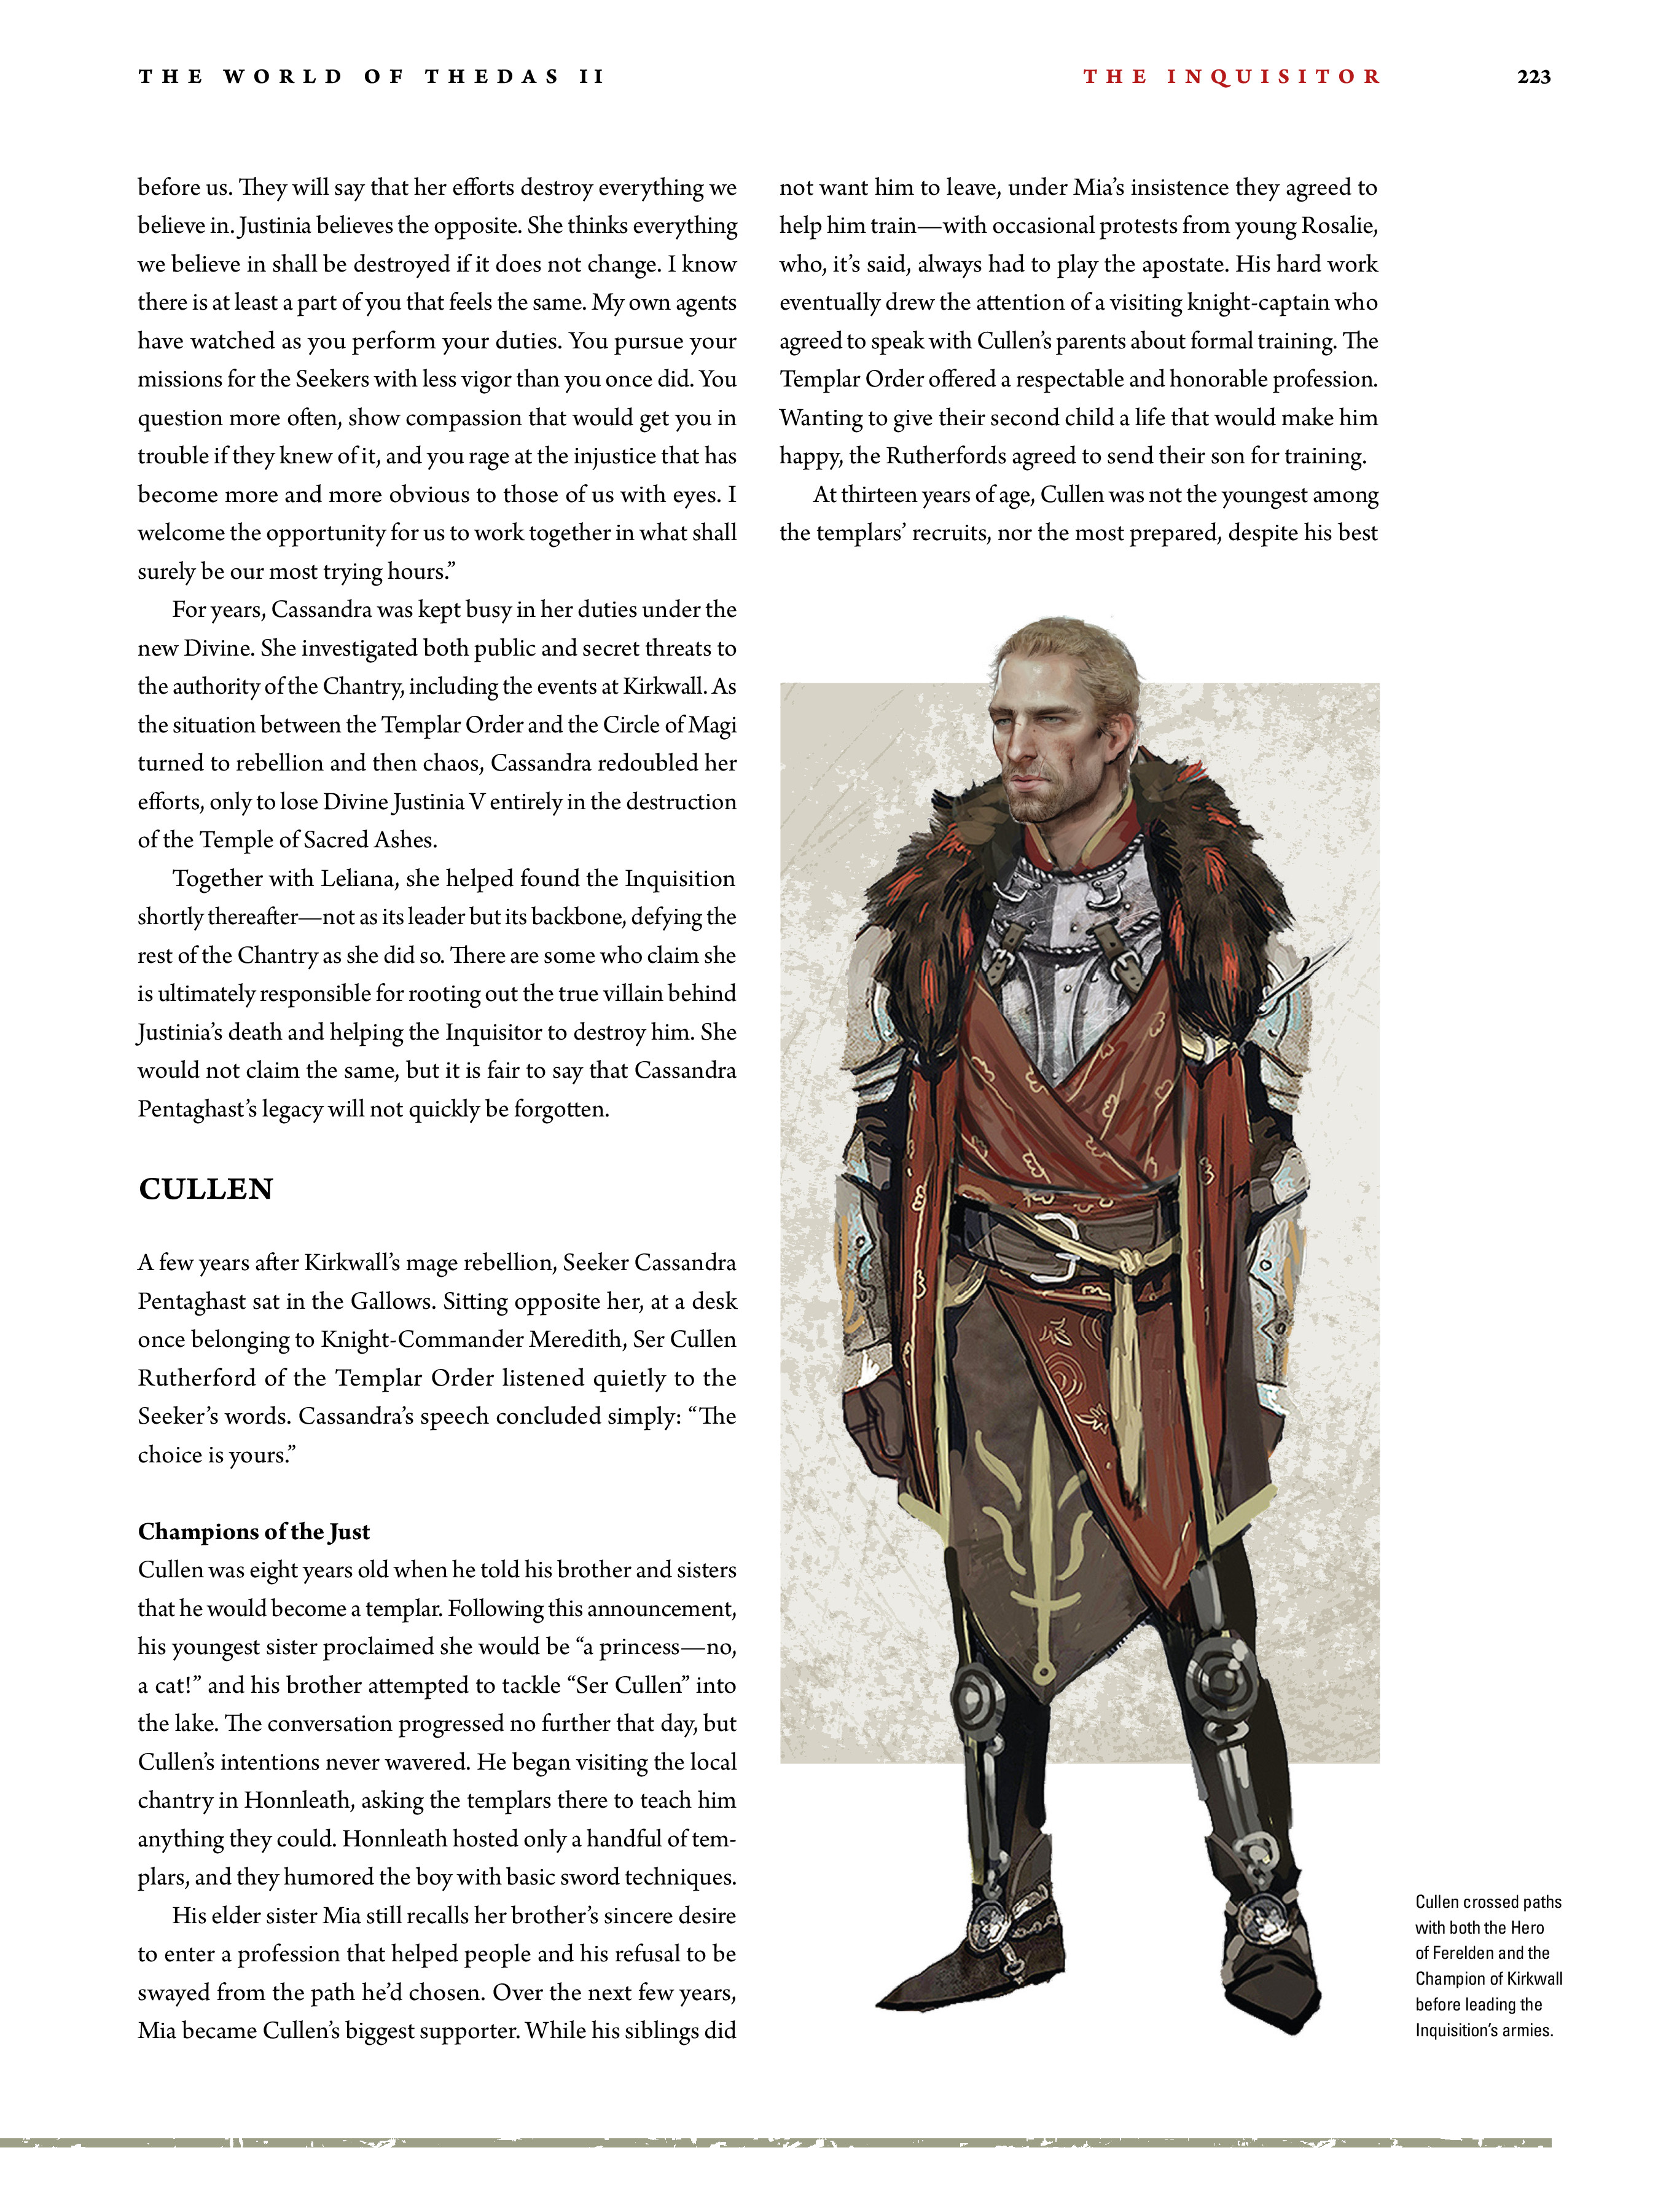 Read online Dragon Age: The World of Thedas comic -  Issue # TPB 2 - 218